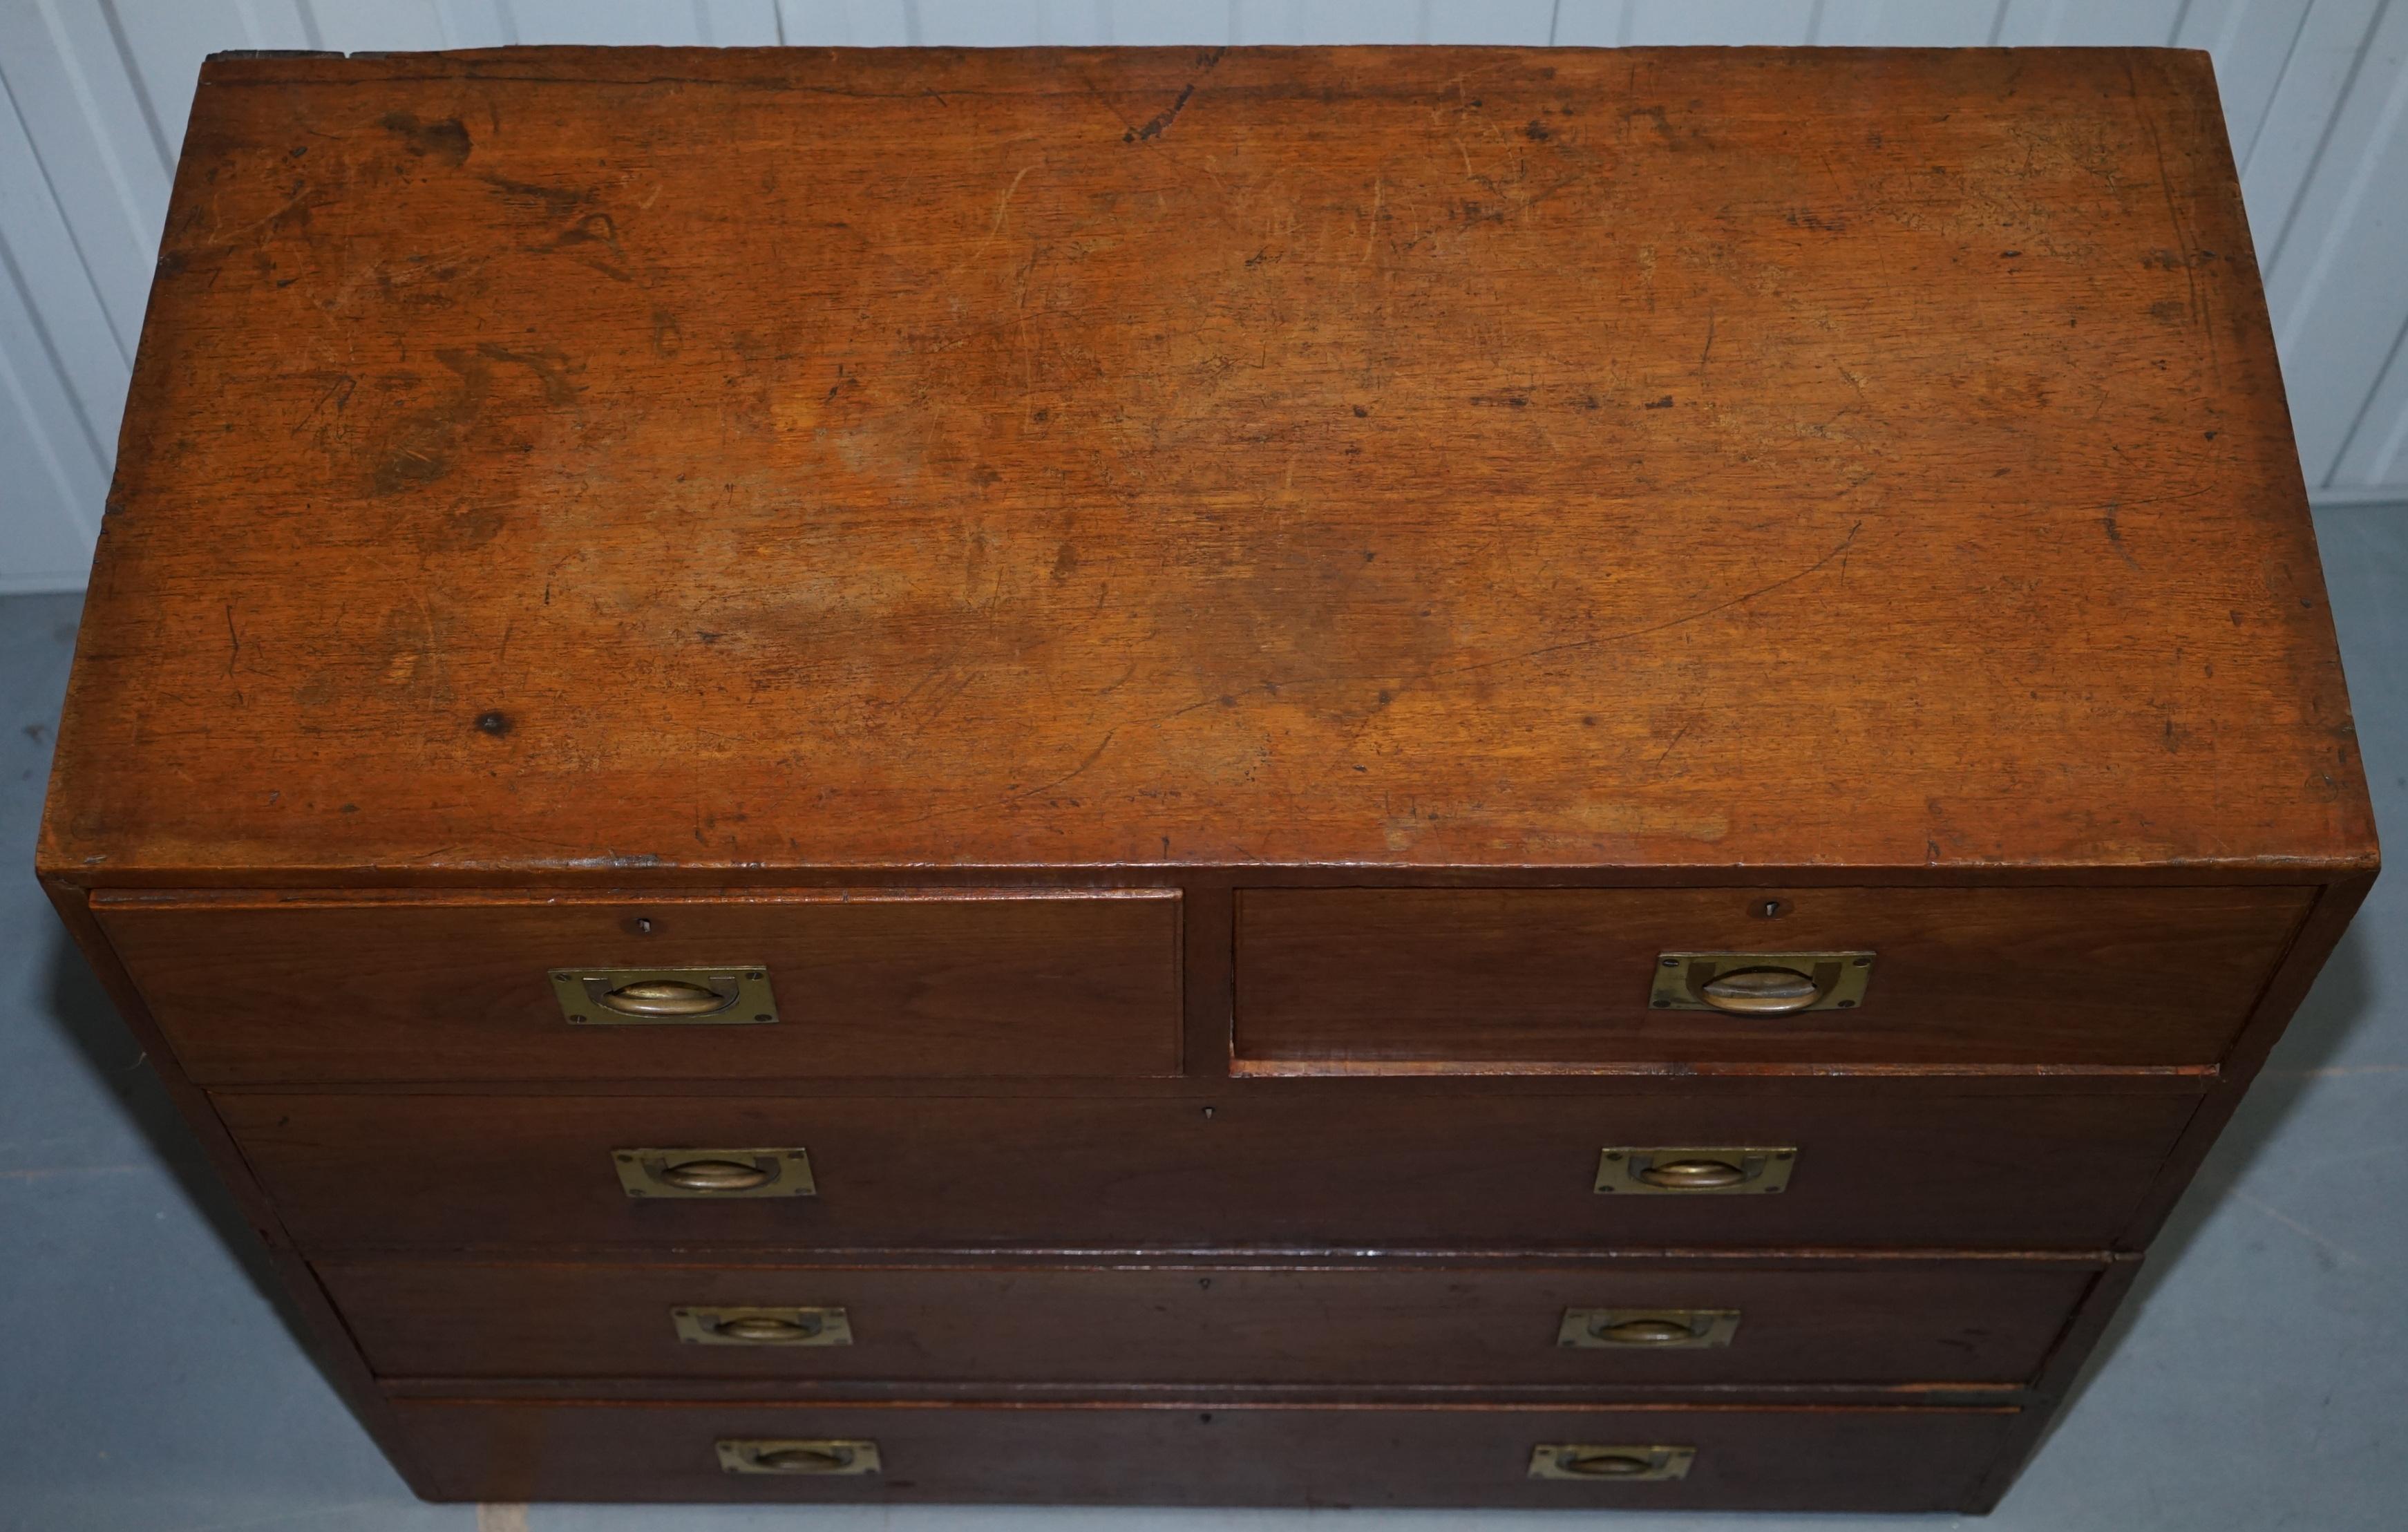 Hand-Crafted SCOTTISH 93RD SUTHERLAND HIGHLANDERS REGIMENT OF FOOT MiLITARY CAMPAIGN CHEST For Sale